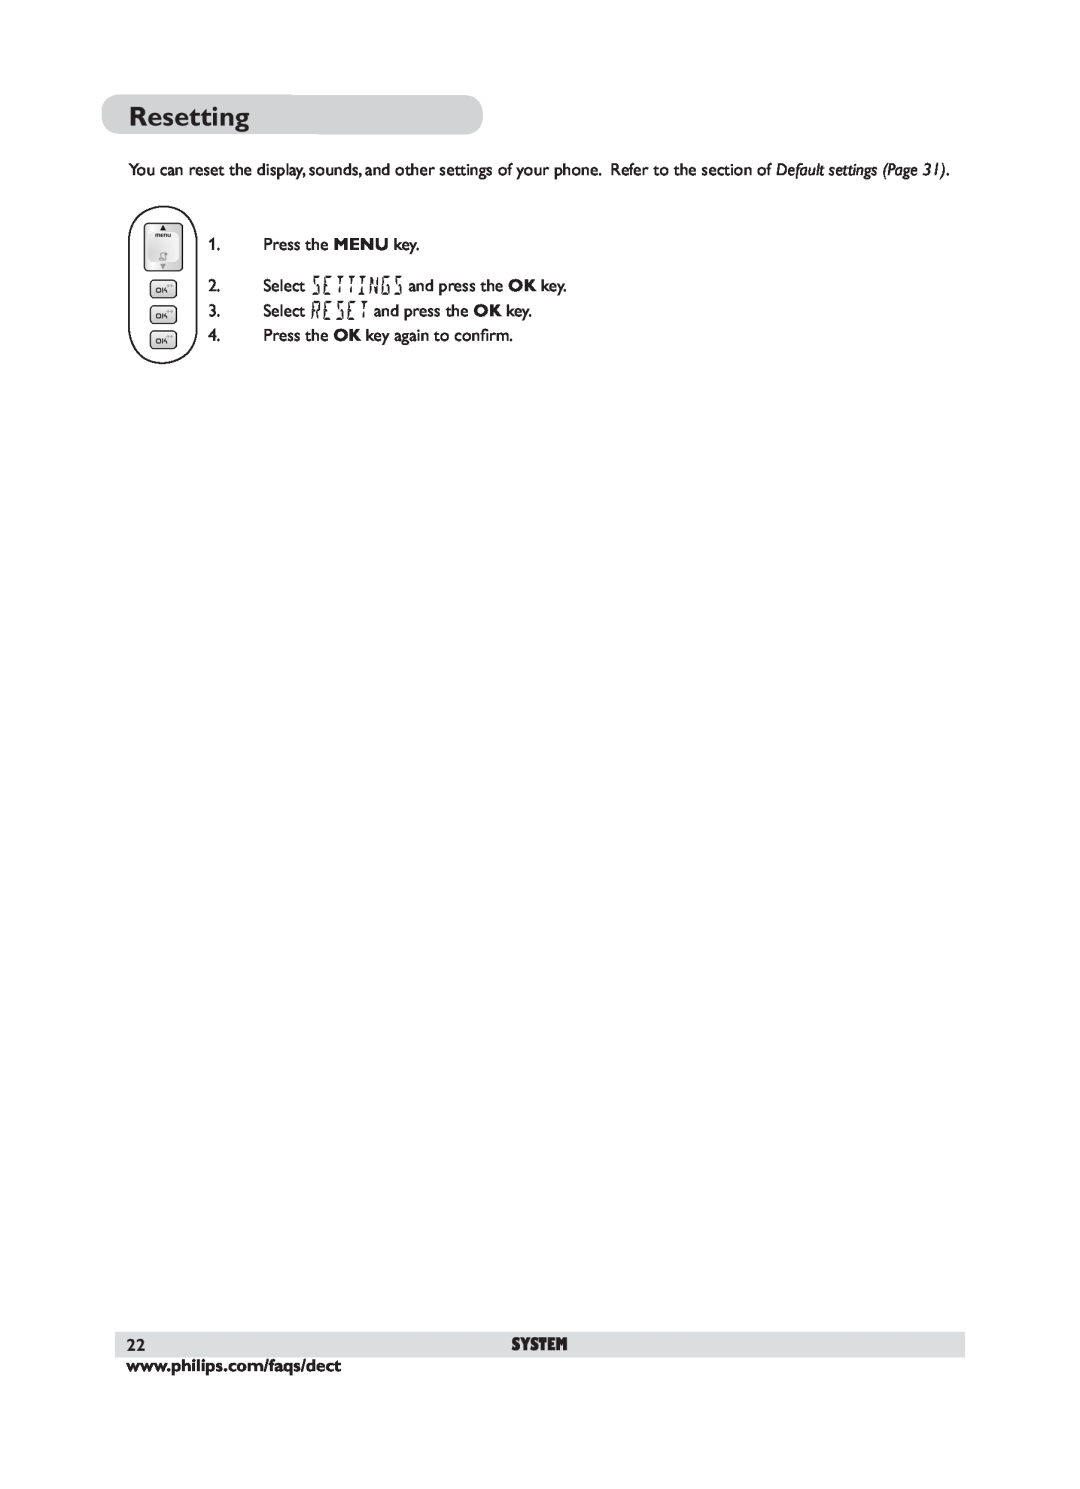 Philips DECT 221 user manual Resetting 